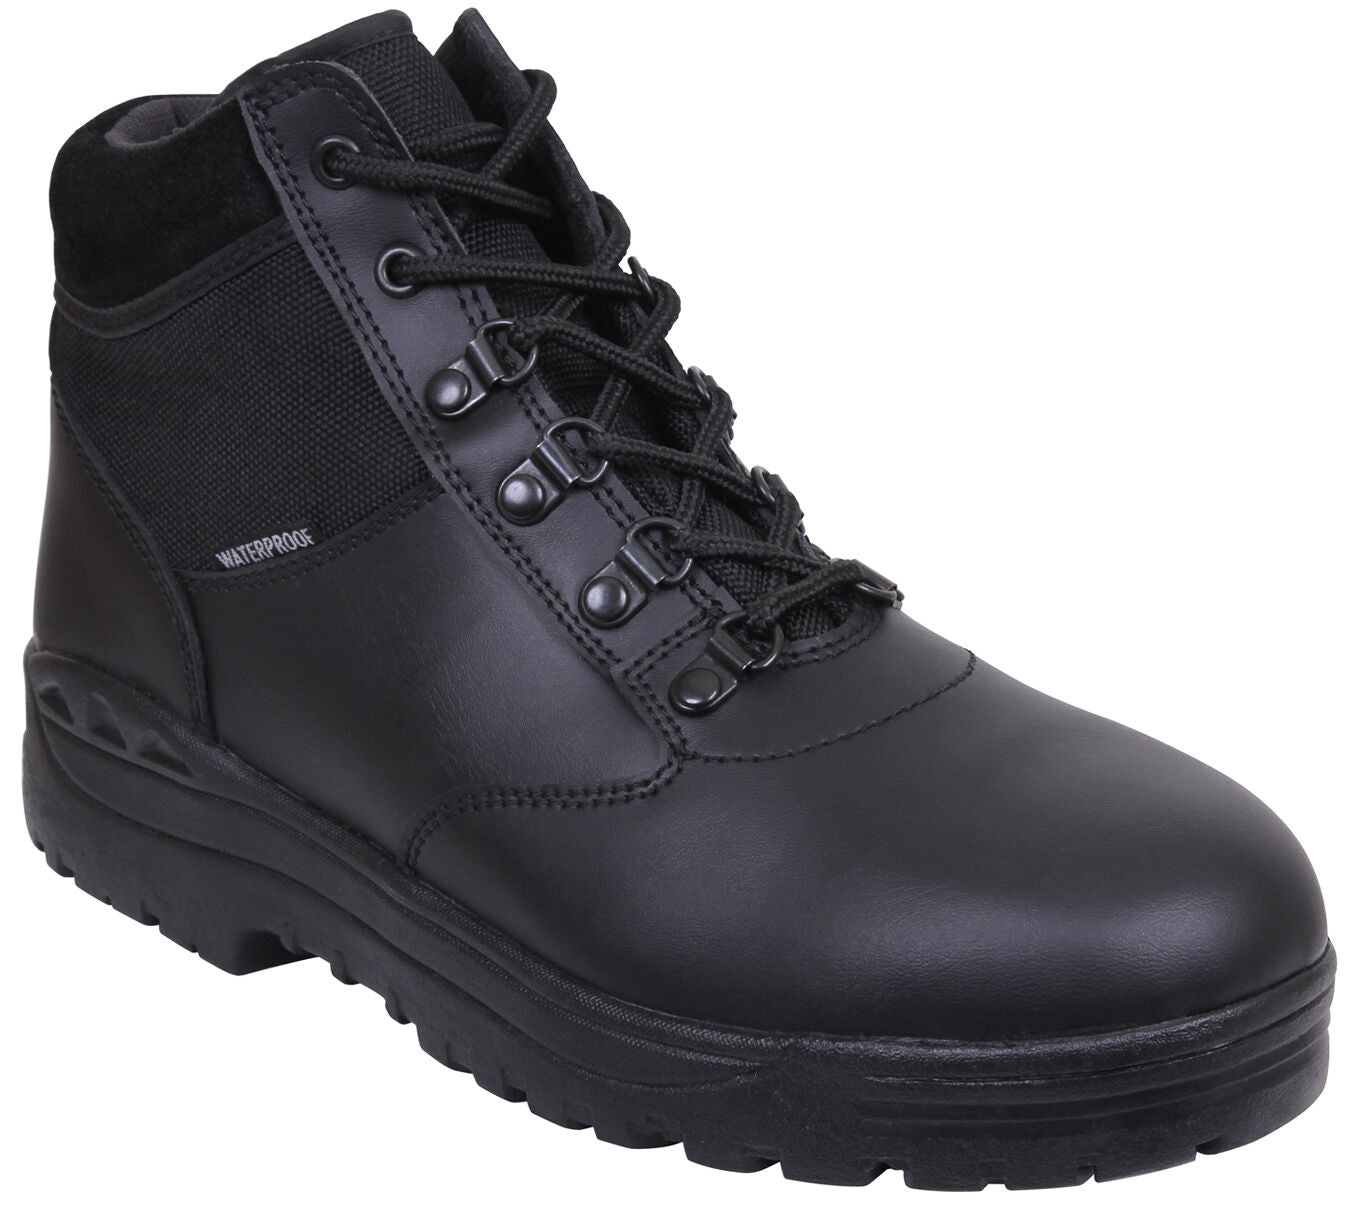 Rothco Forced Entry Tactical Waterproof Boot - 6 Inch